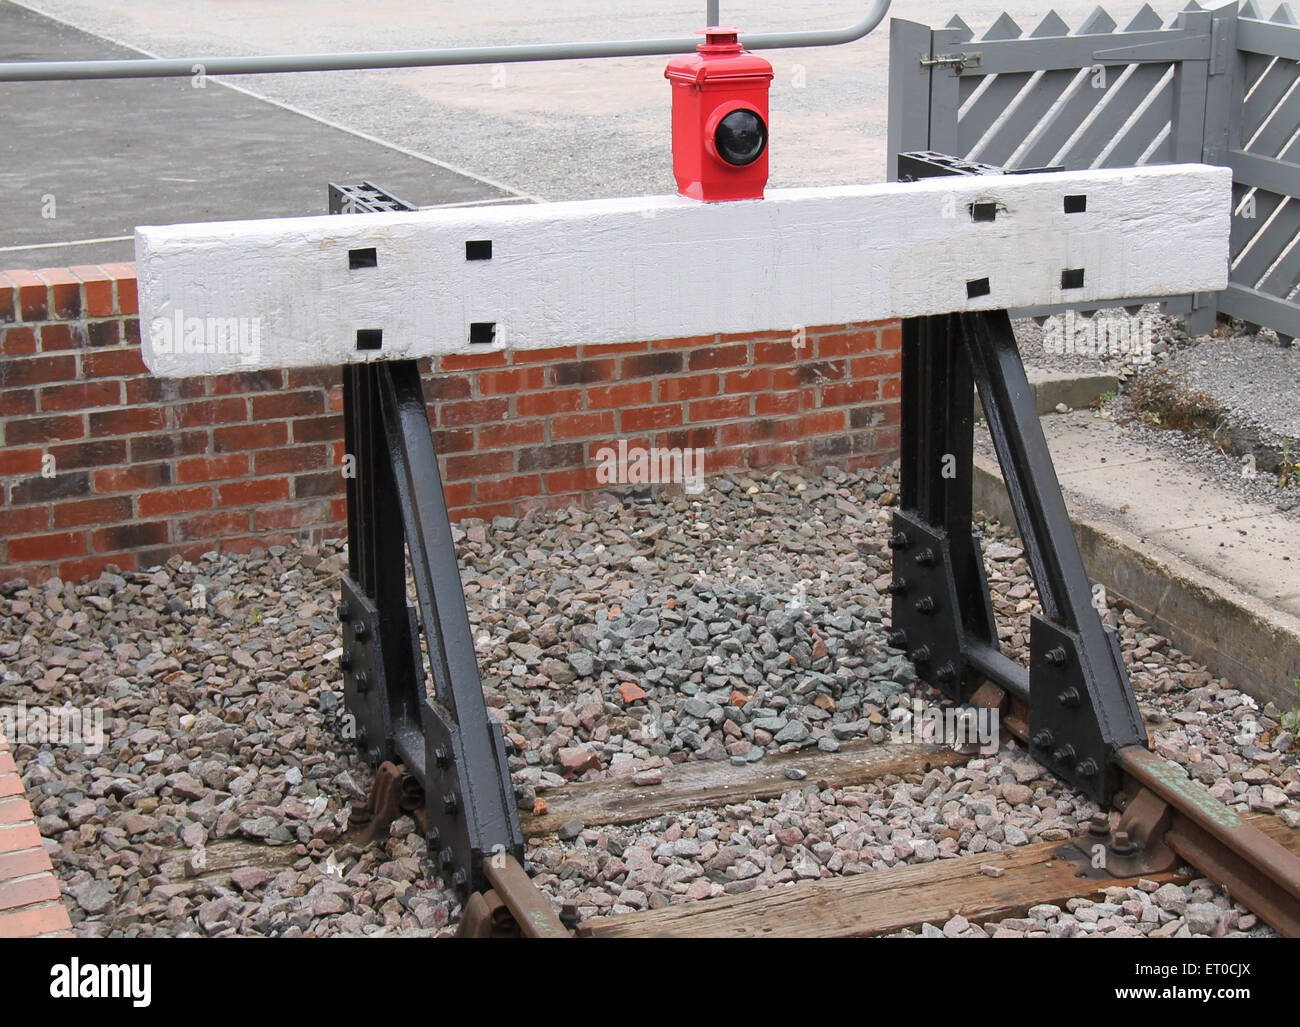 A Wooden Train Buffer at the End of a Railway Track. Stock Photo